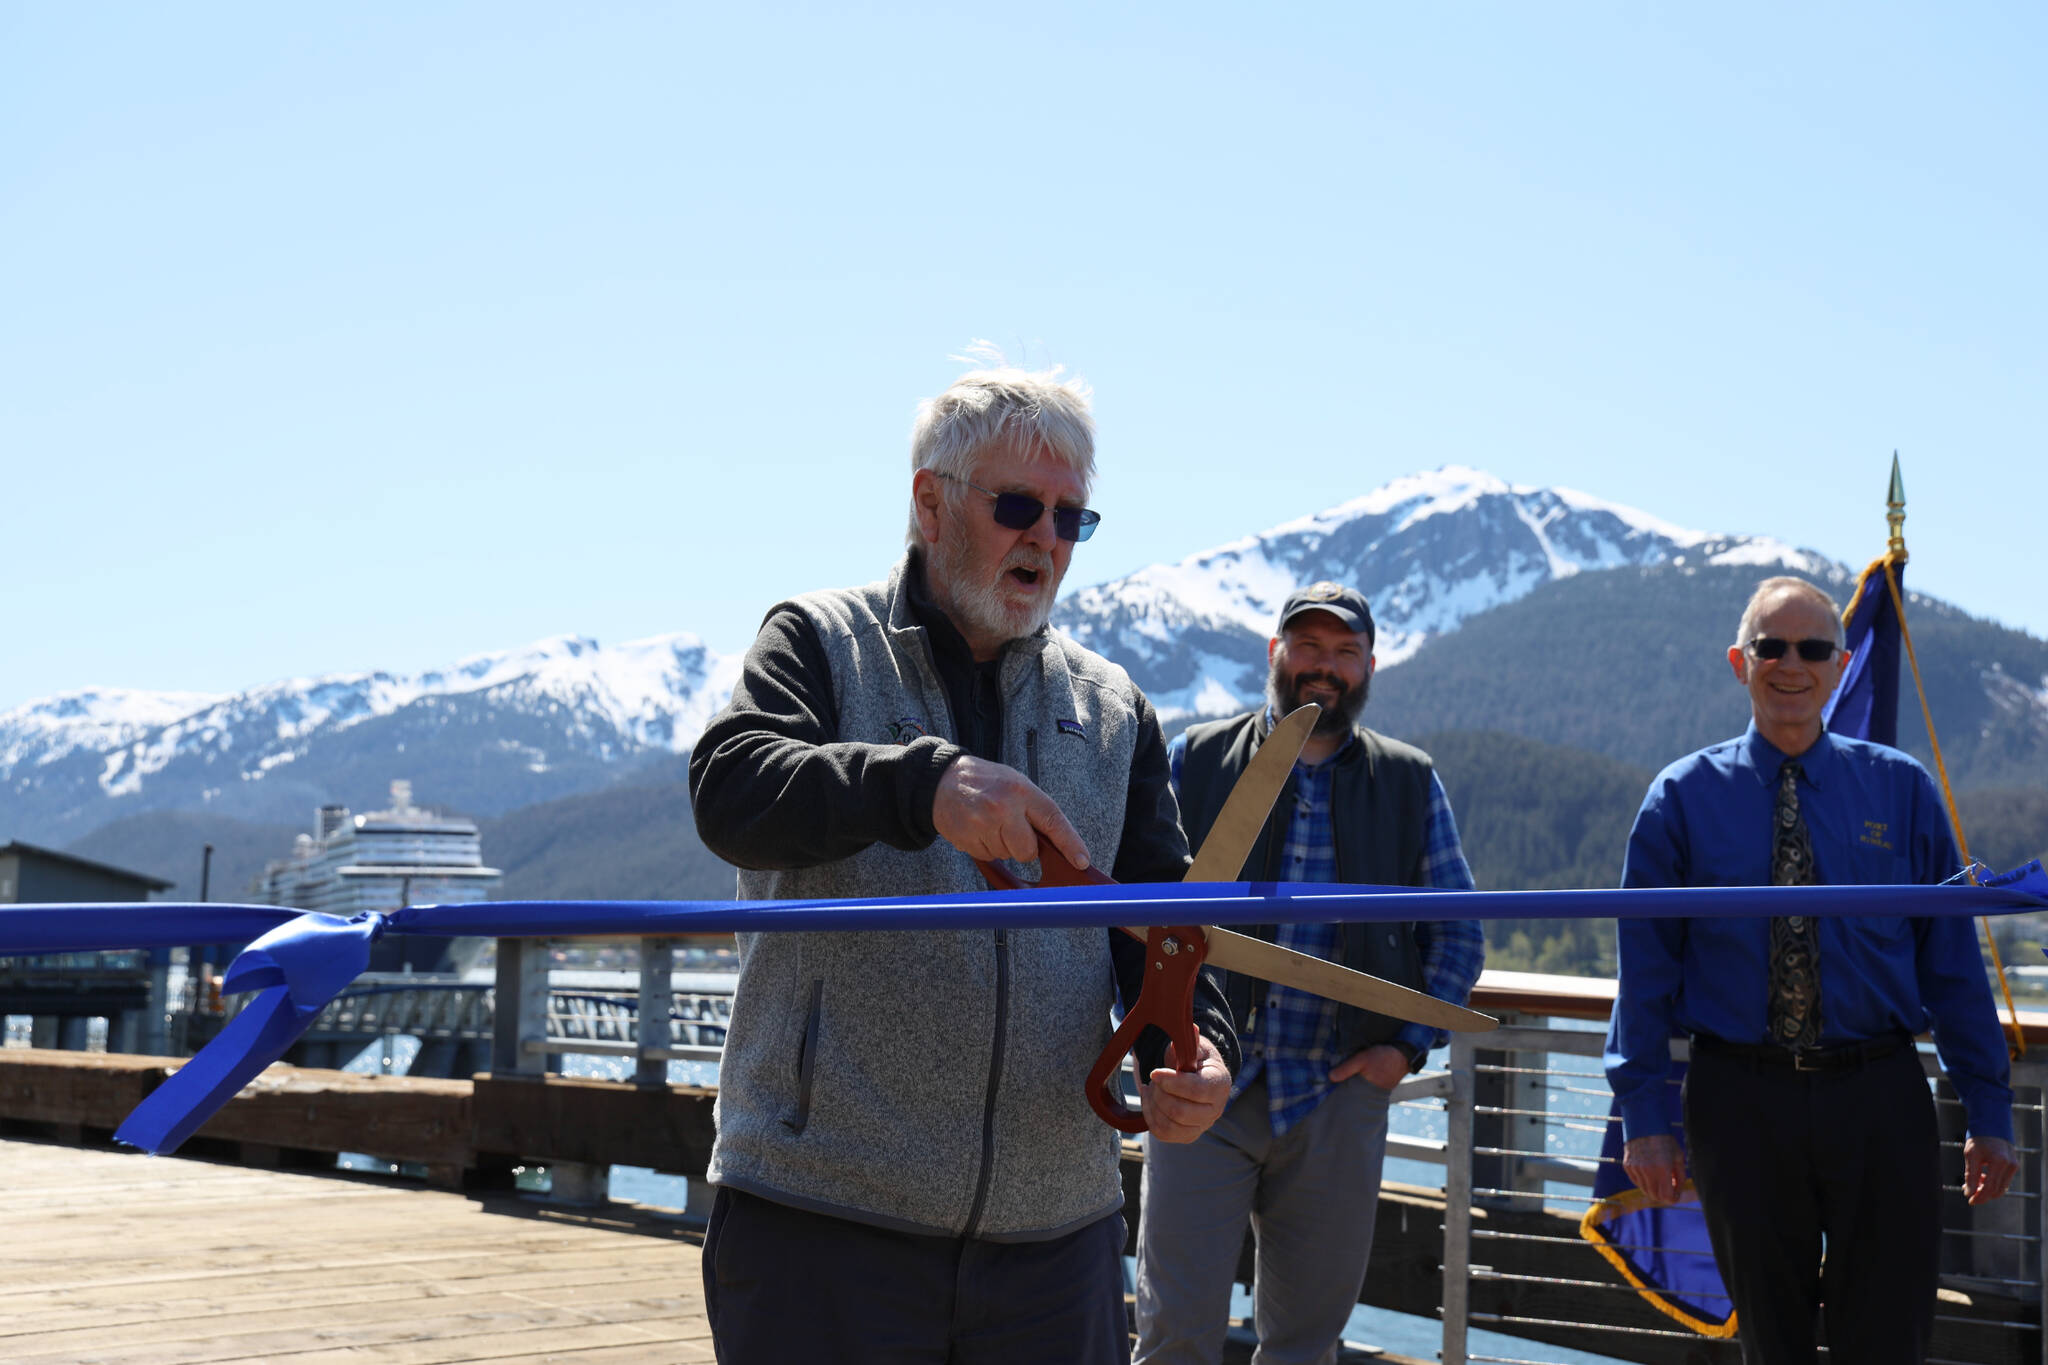 City and Borough of Juneau Docks and Harbors Board Vice Chairman Jim Becker cuts a ribbon Monday afternoon stretched across the Seawalk downtown in celebration of the city’s completion of the Docks and Harbors Marine Deckover Project. (Clarise Larson / Juneau Empire)